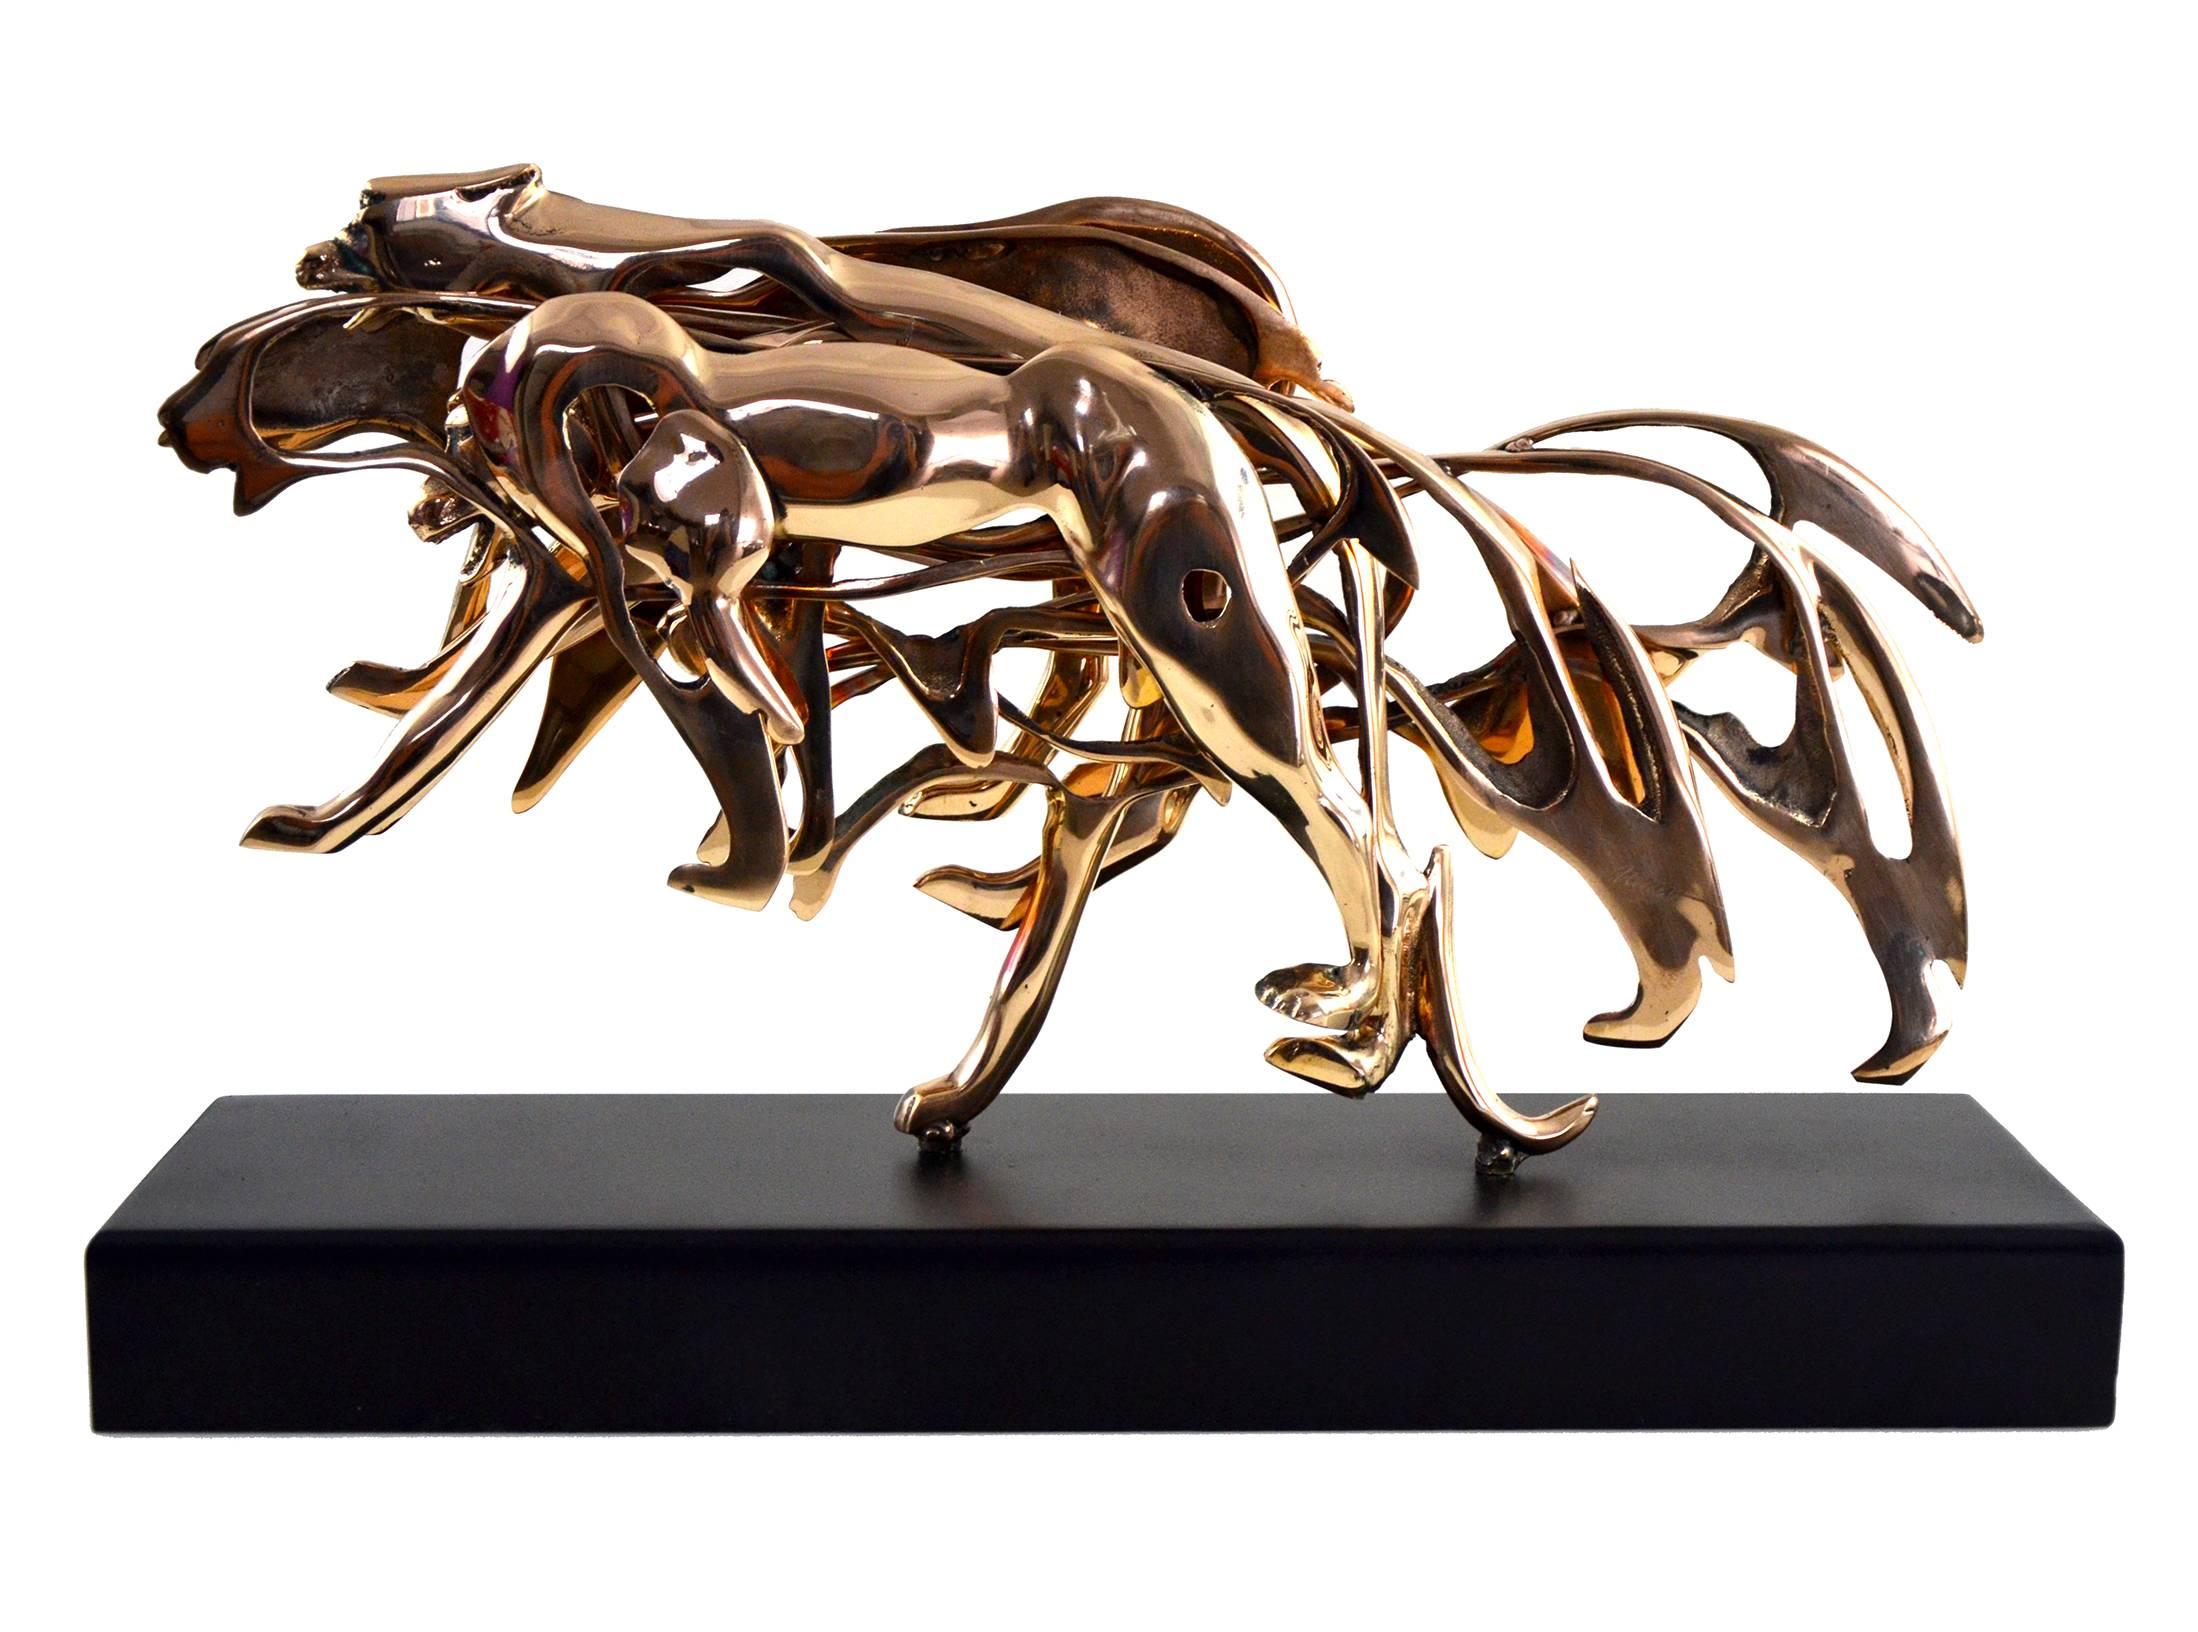 Arman - Gilded Panther - Signed Bronze Sculpture
His animal sculptures are very rare and recognized for their originality and their beauty.

Material: Bronze.
Signed and Numbered
Dimensions: 31 x 50 x 9 cm
Edition: 99
With Certificate of